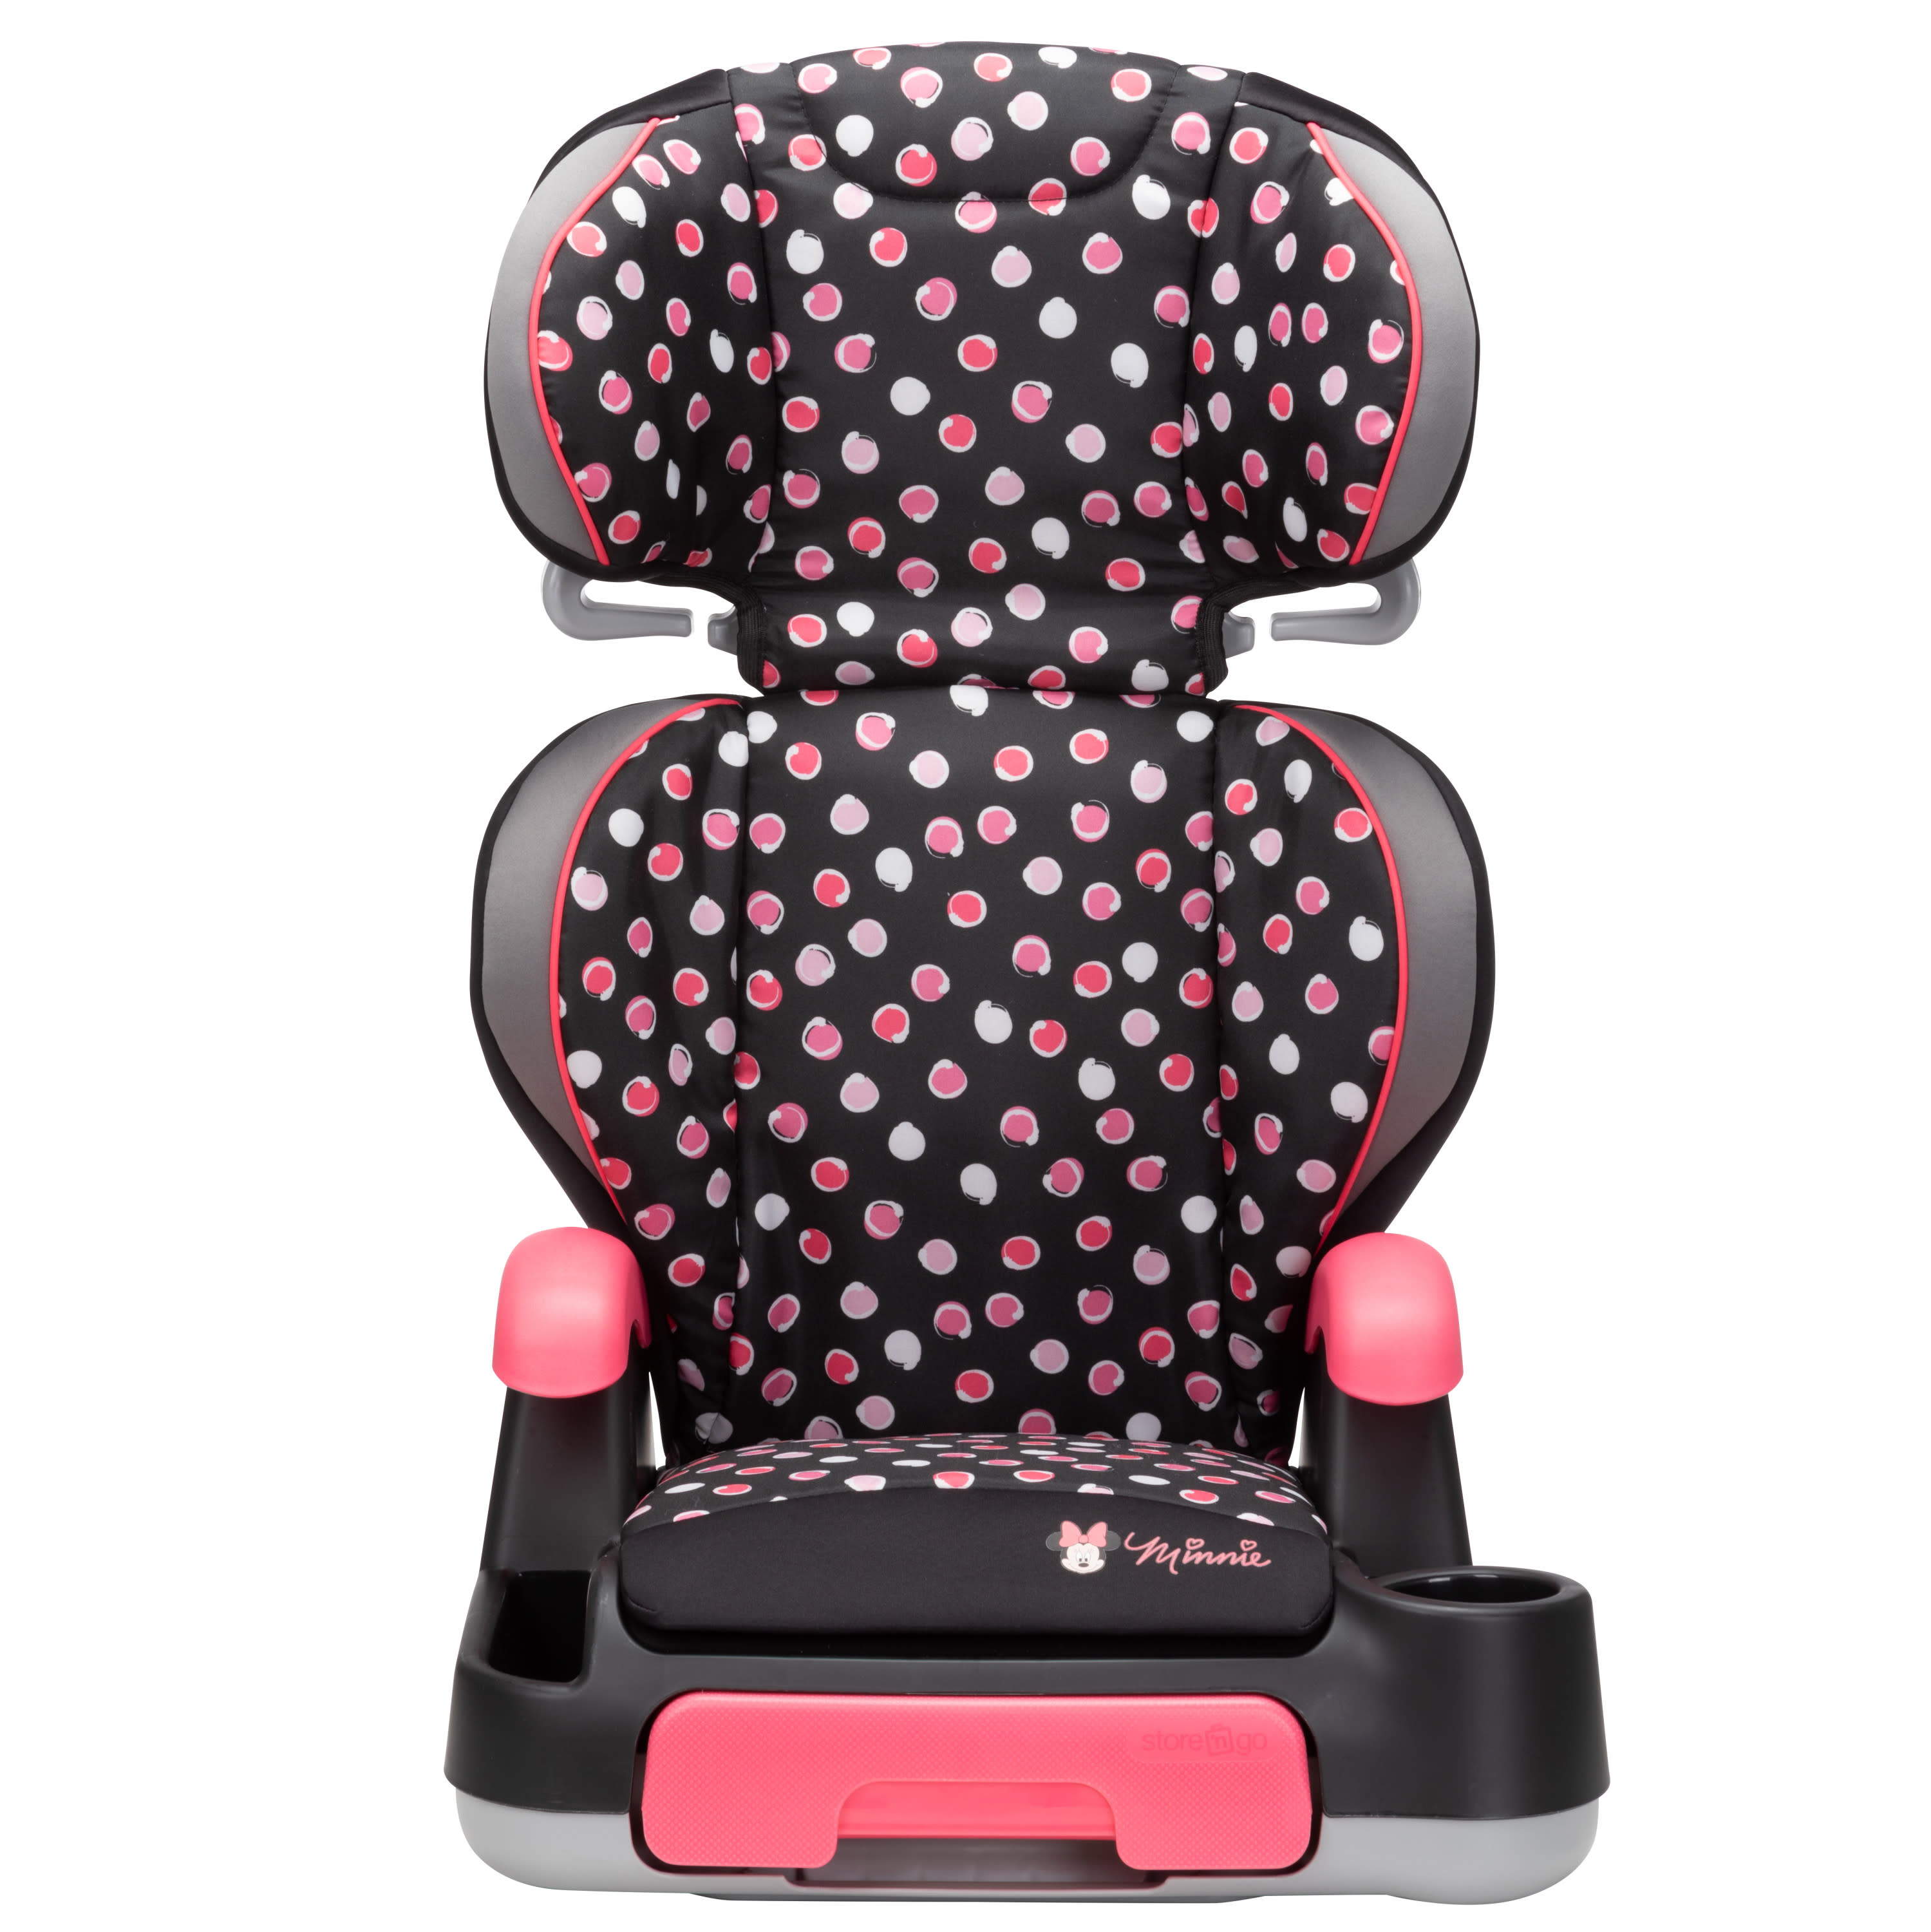 Disney Baby Store 'n Go Sport Booster Car Seat, Minnie Mash Up - image 11 of 21